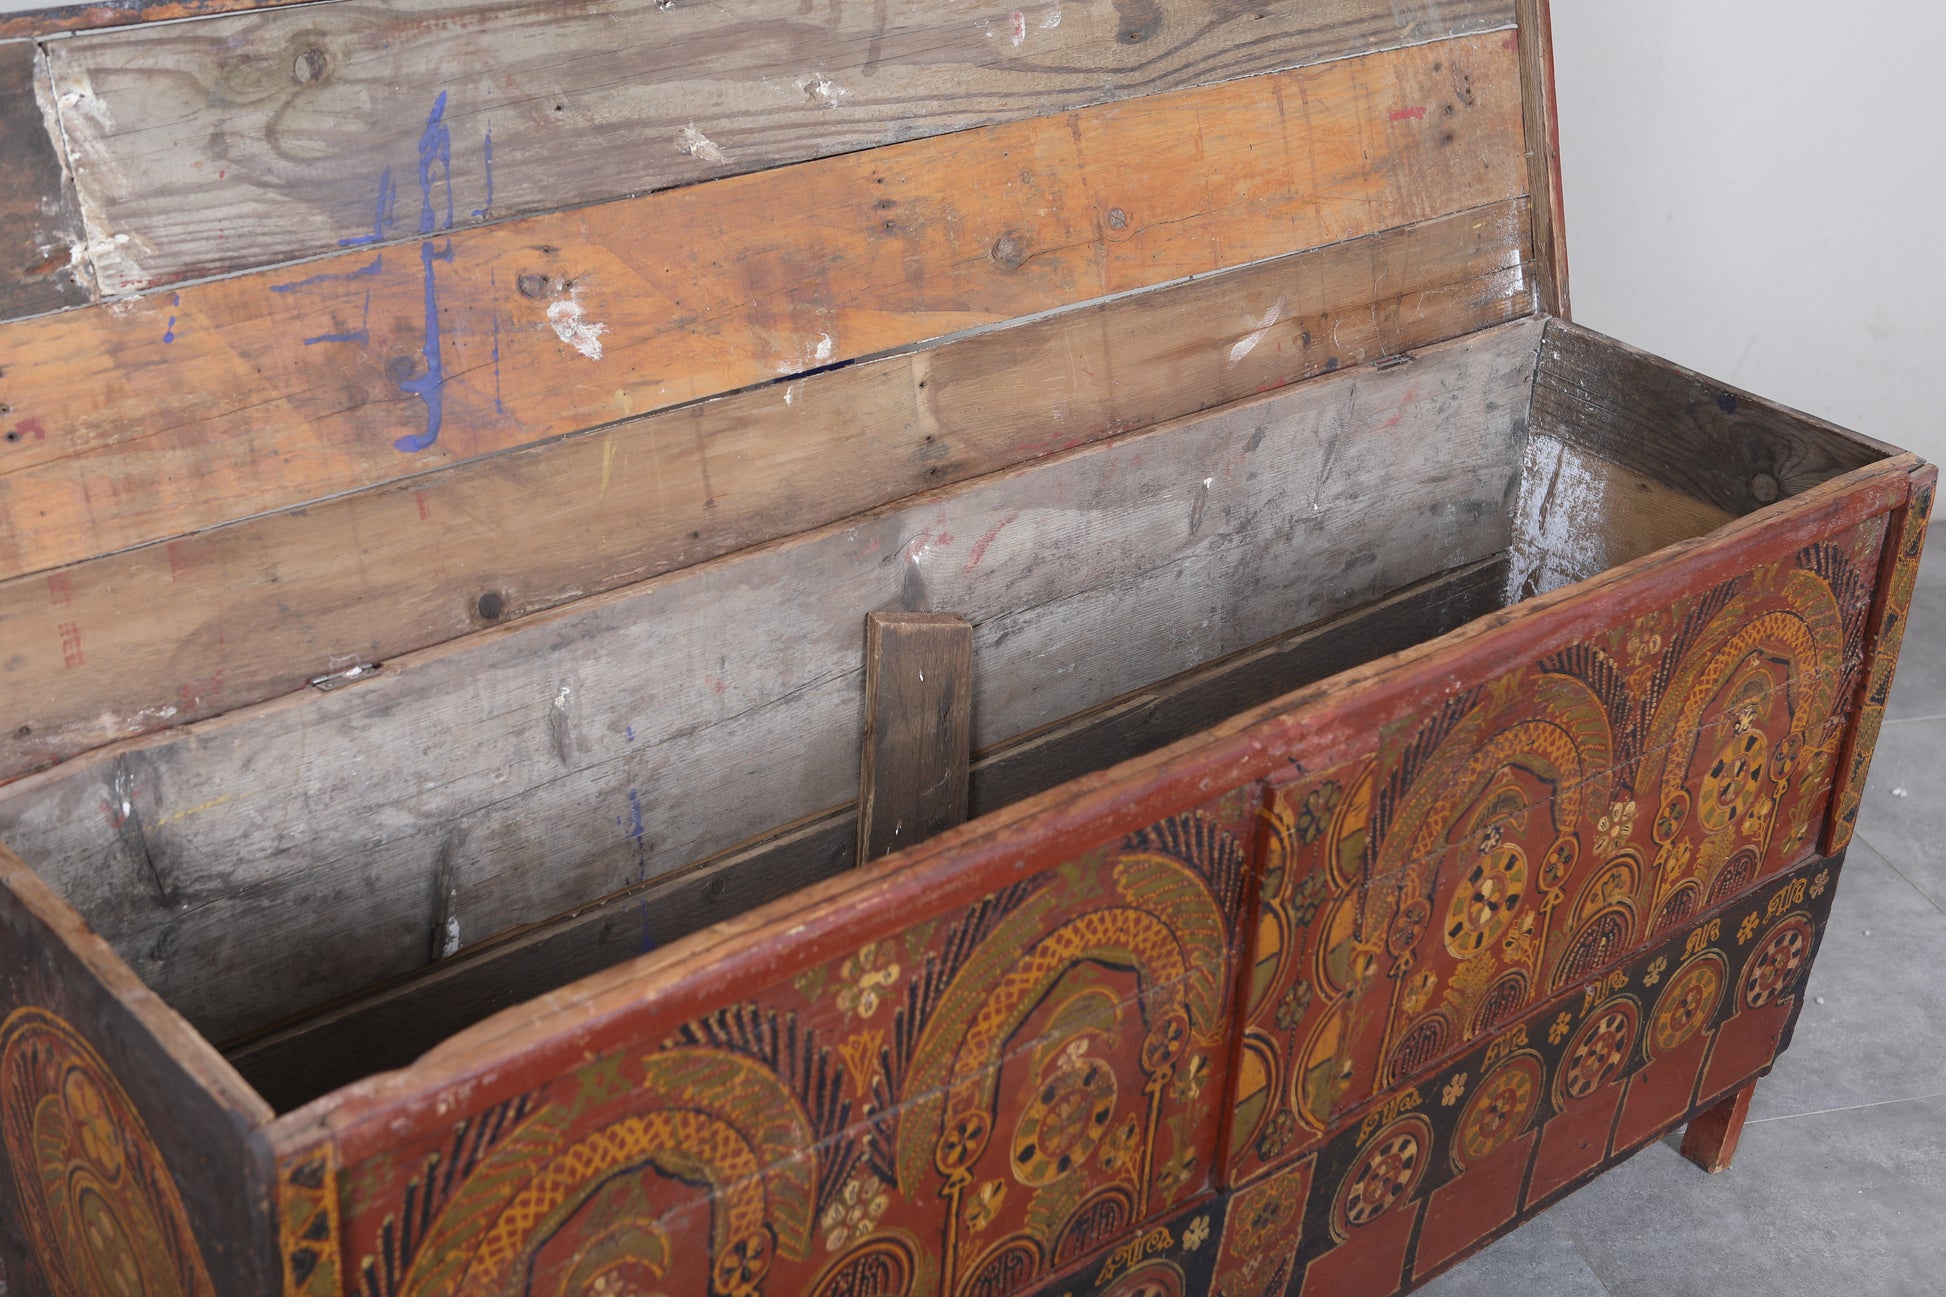 Vintage Moroccan chest  H 25.5  inches x W 53.5 inches x D 15.3 inches - wood chest